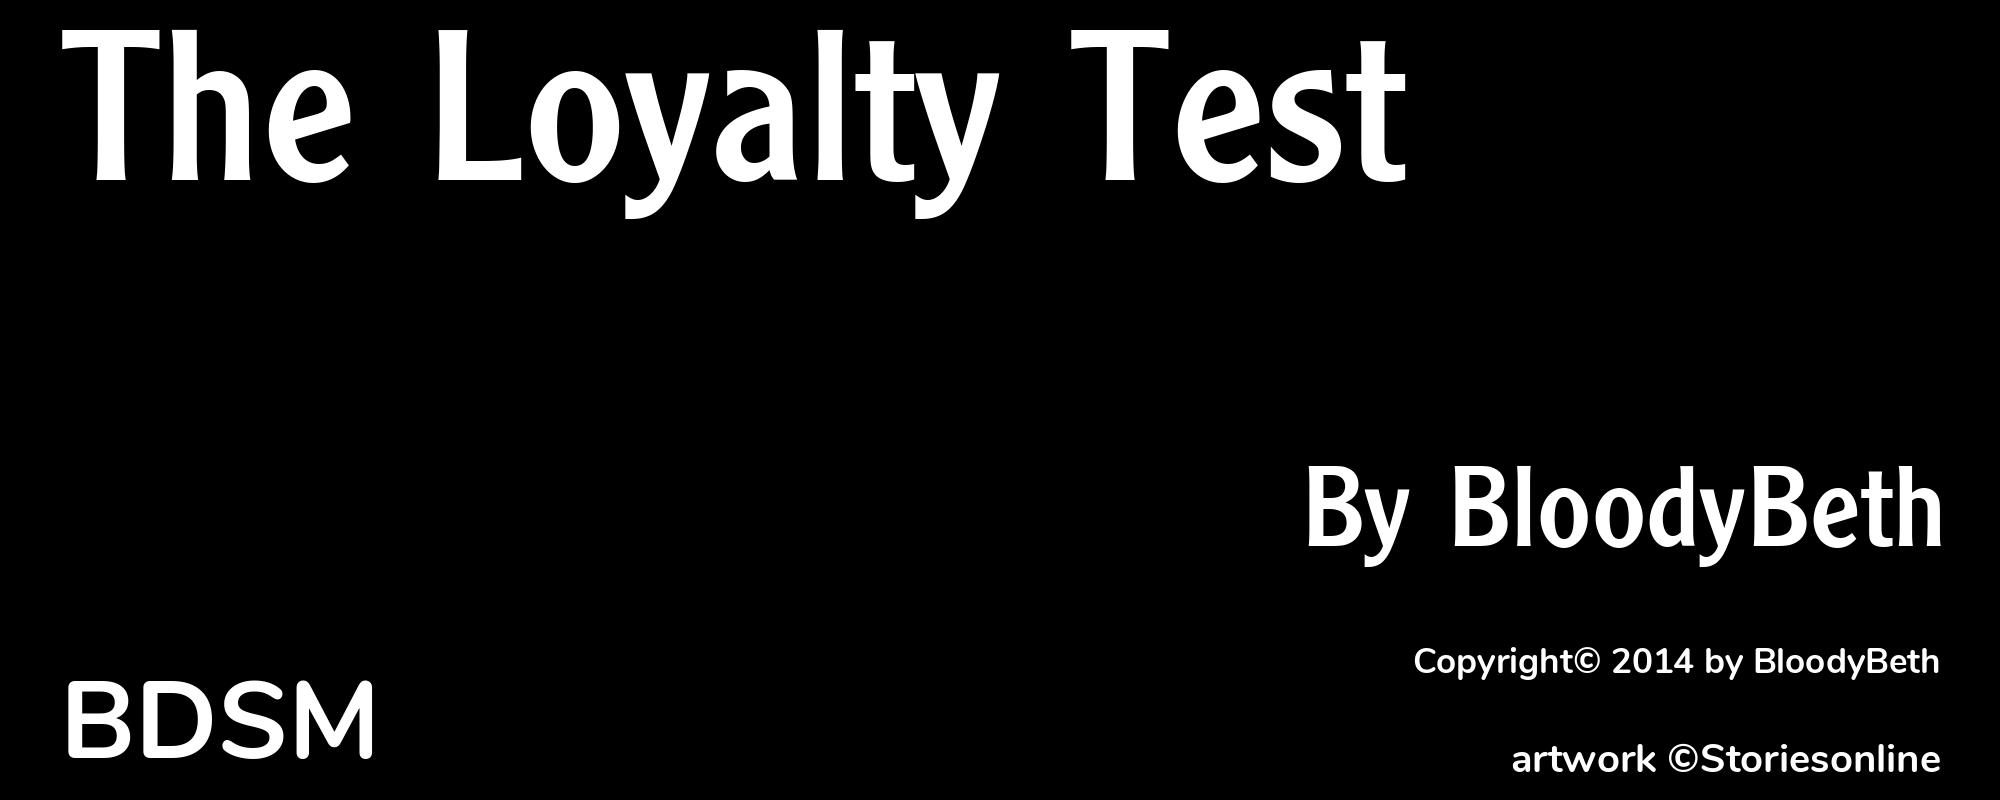 The Loyalty Test - Cover